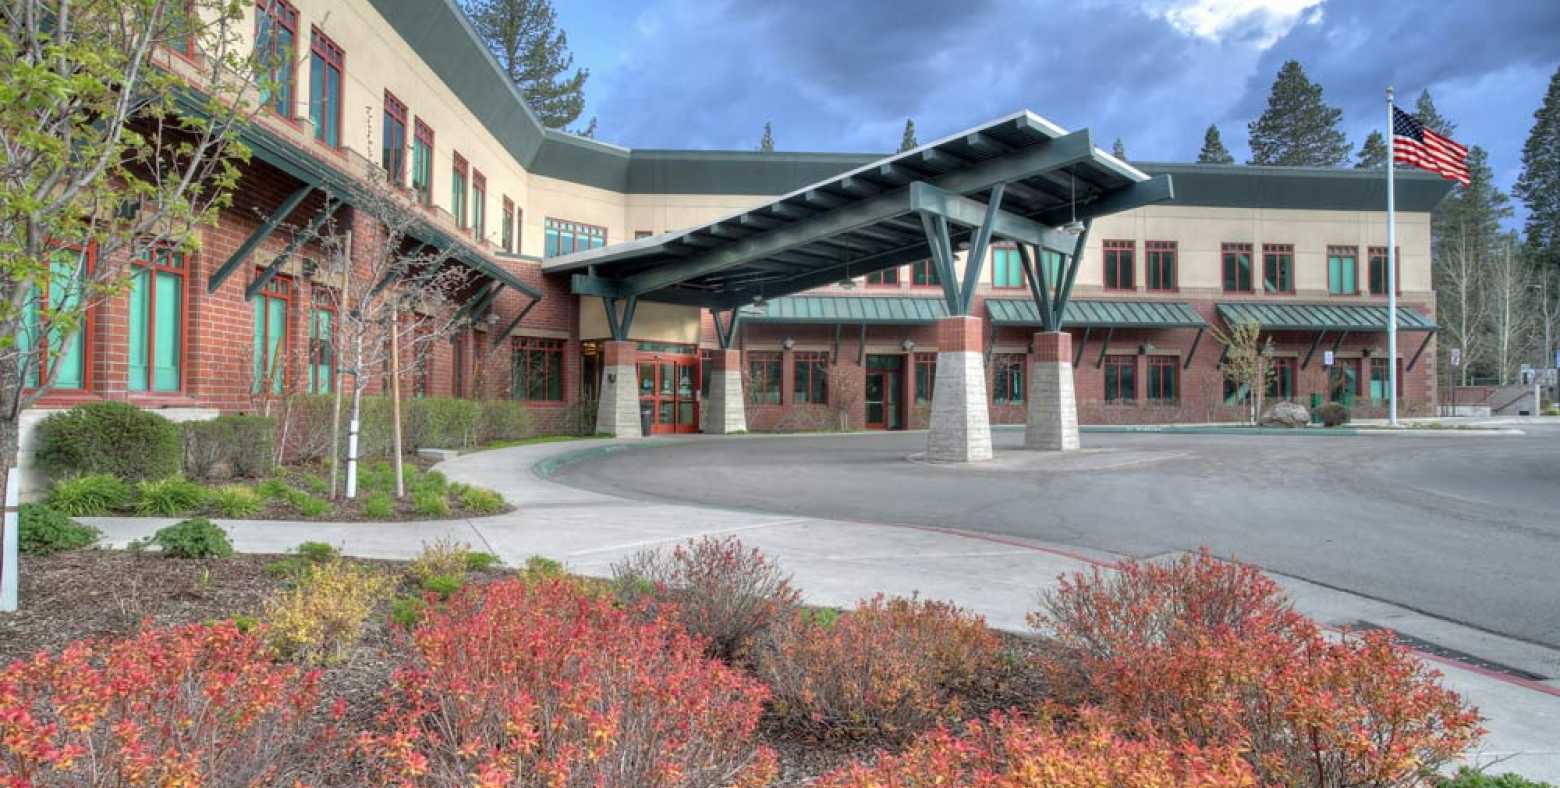 Tahoe Forest Hospital exterior